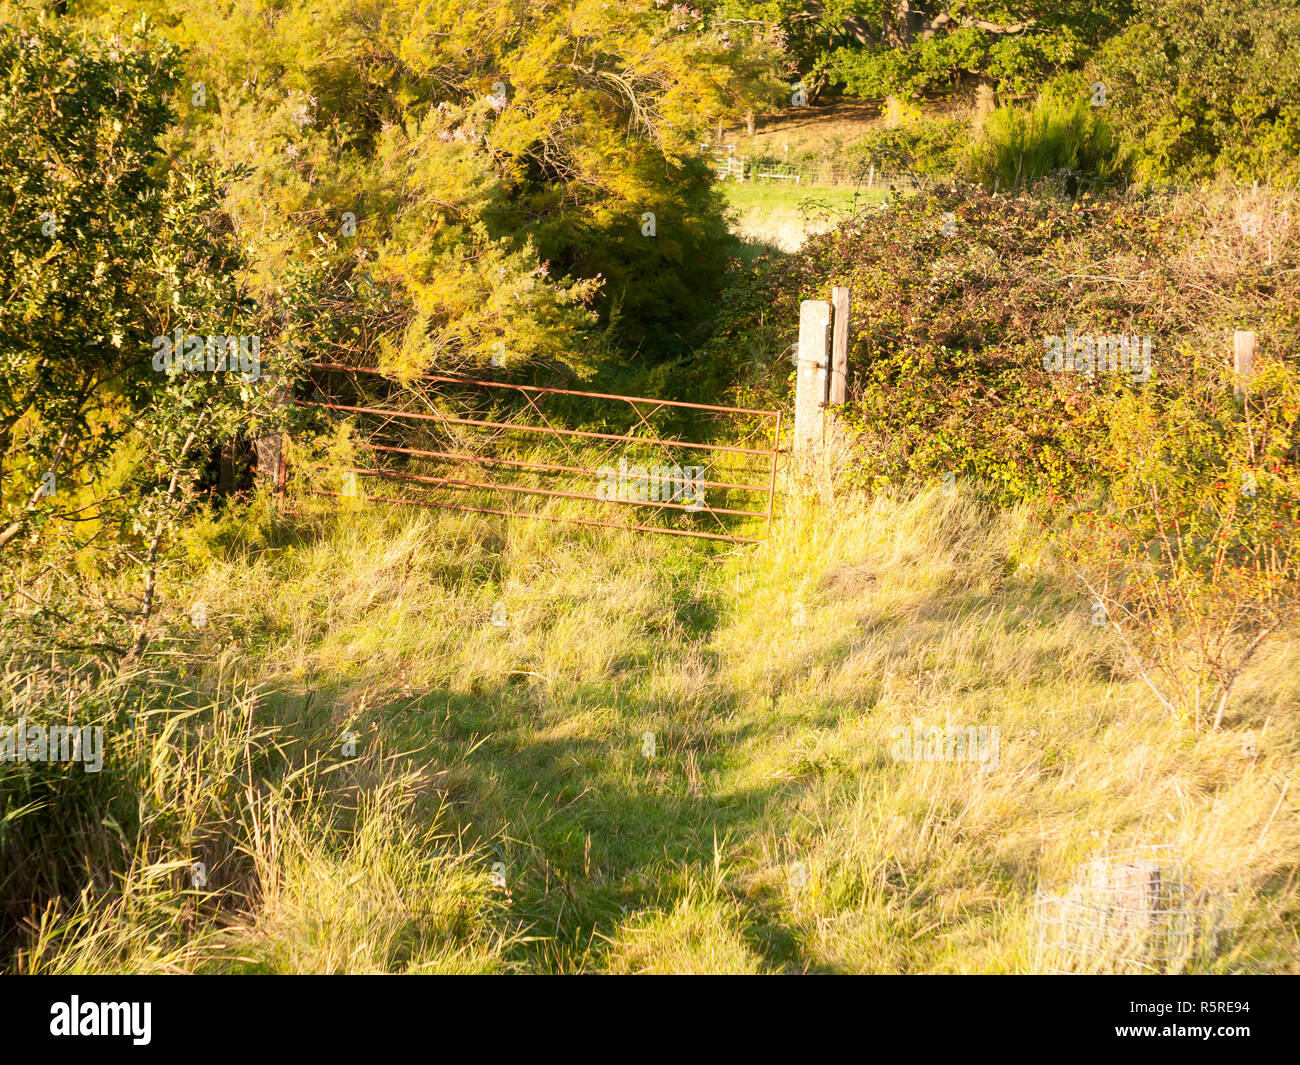 sunset light over a country grass land path scene with rusty old gate to farm in distance Stock Photo